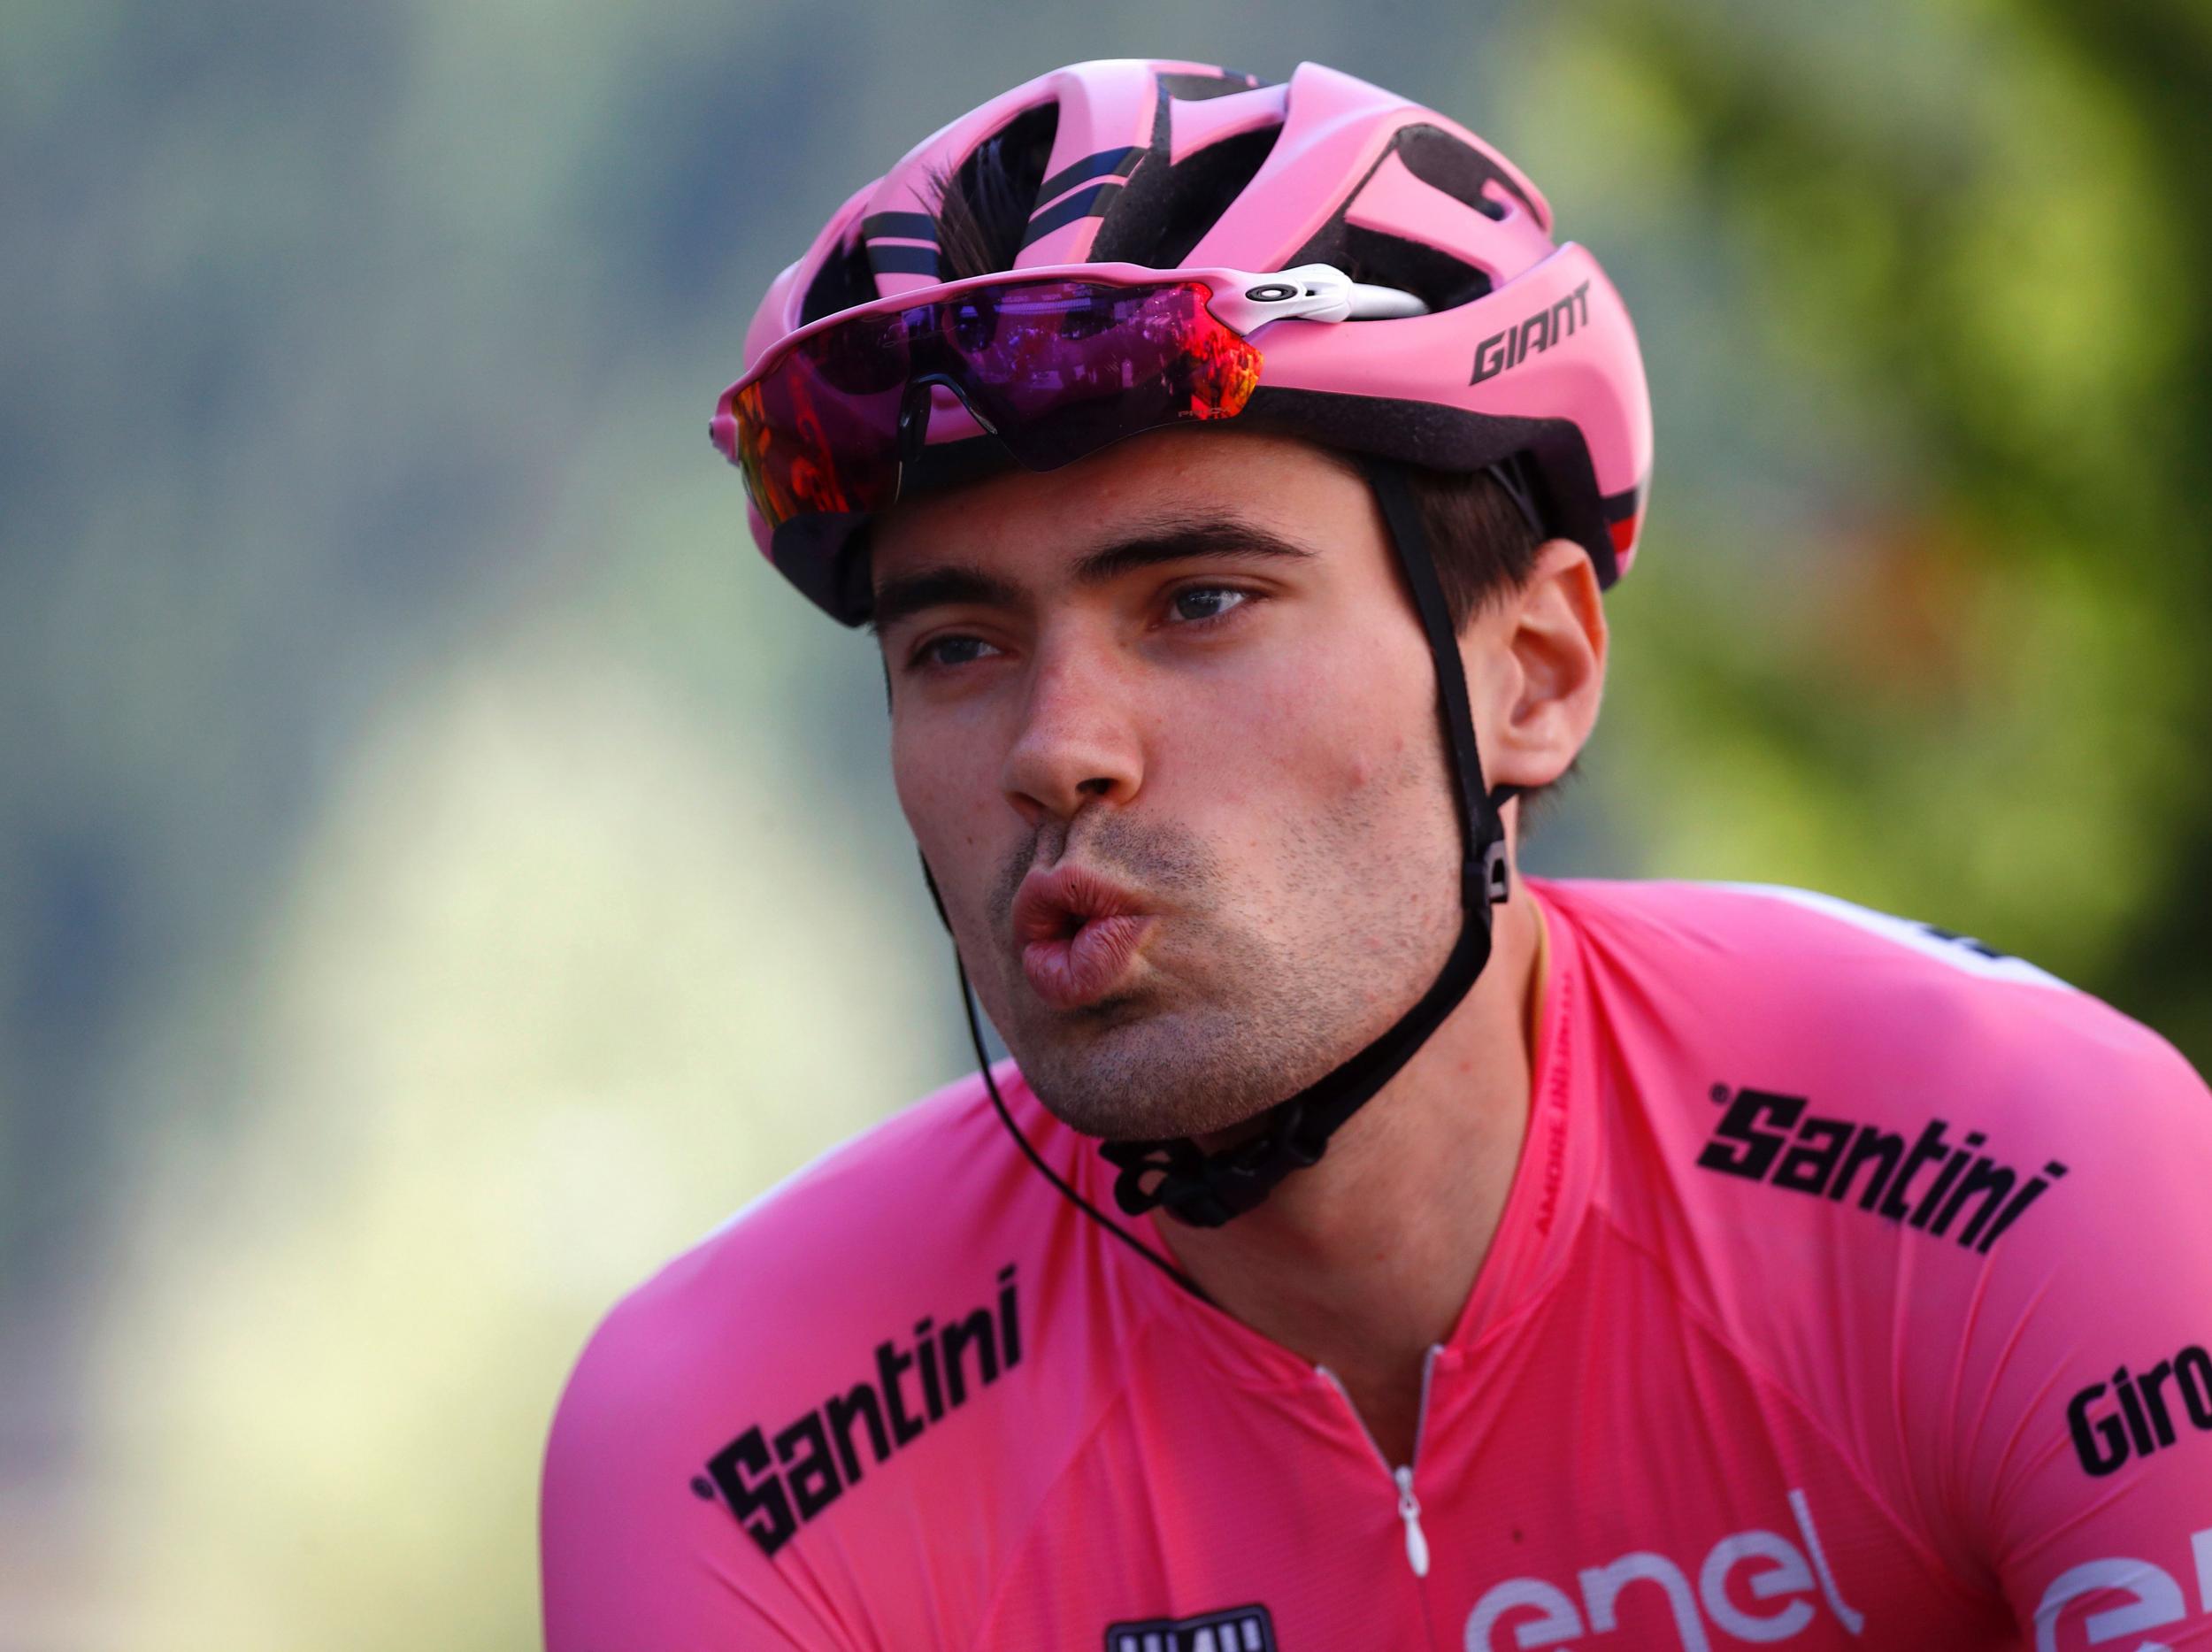 The Dutchman will hope to reclaim the pink jersey on the final day